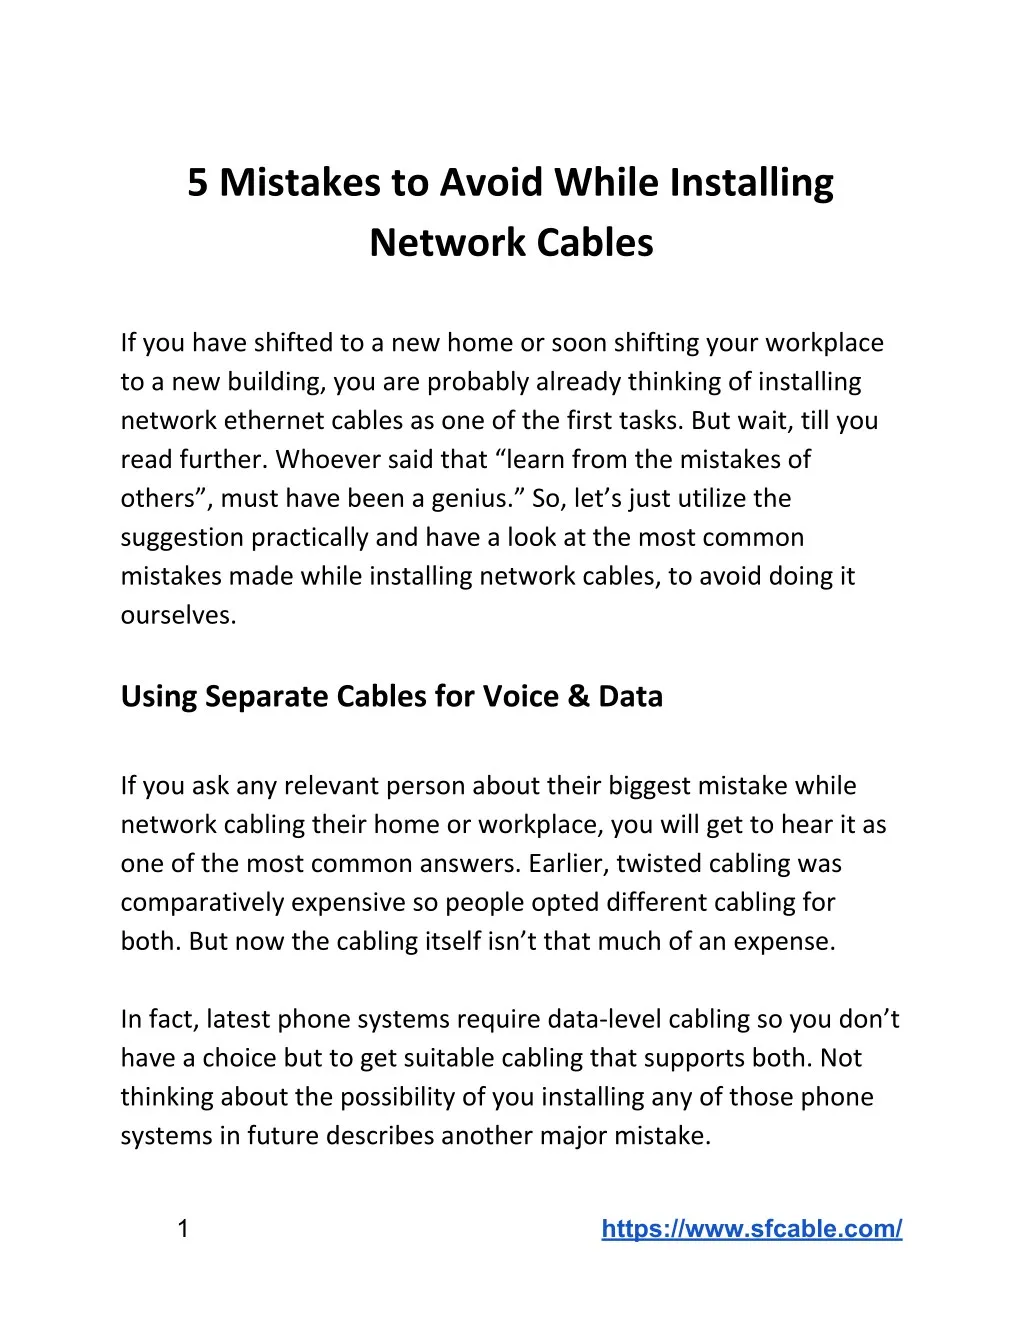 5 mistakes to avoid while installing network